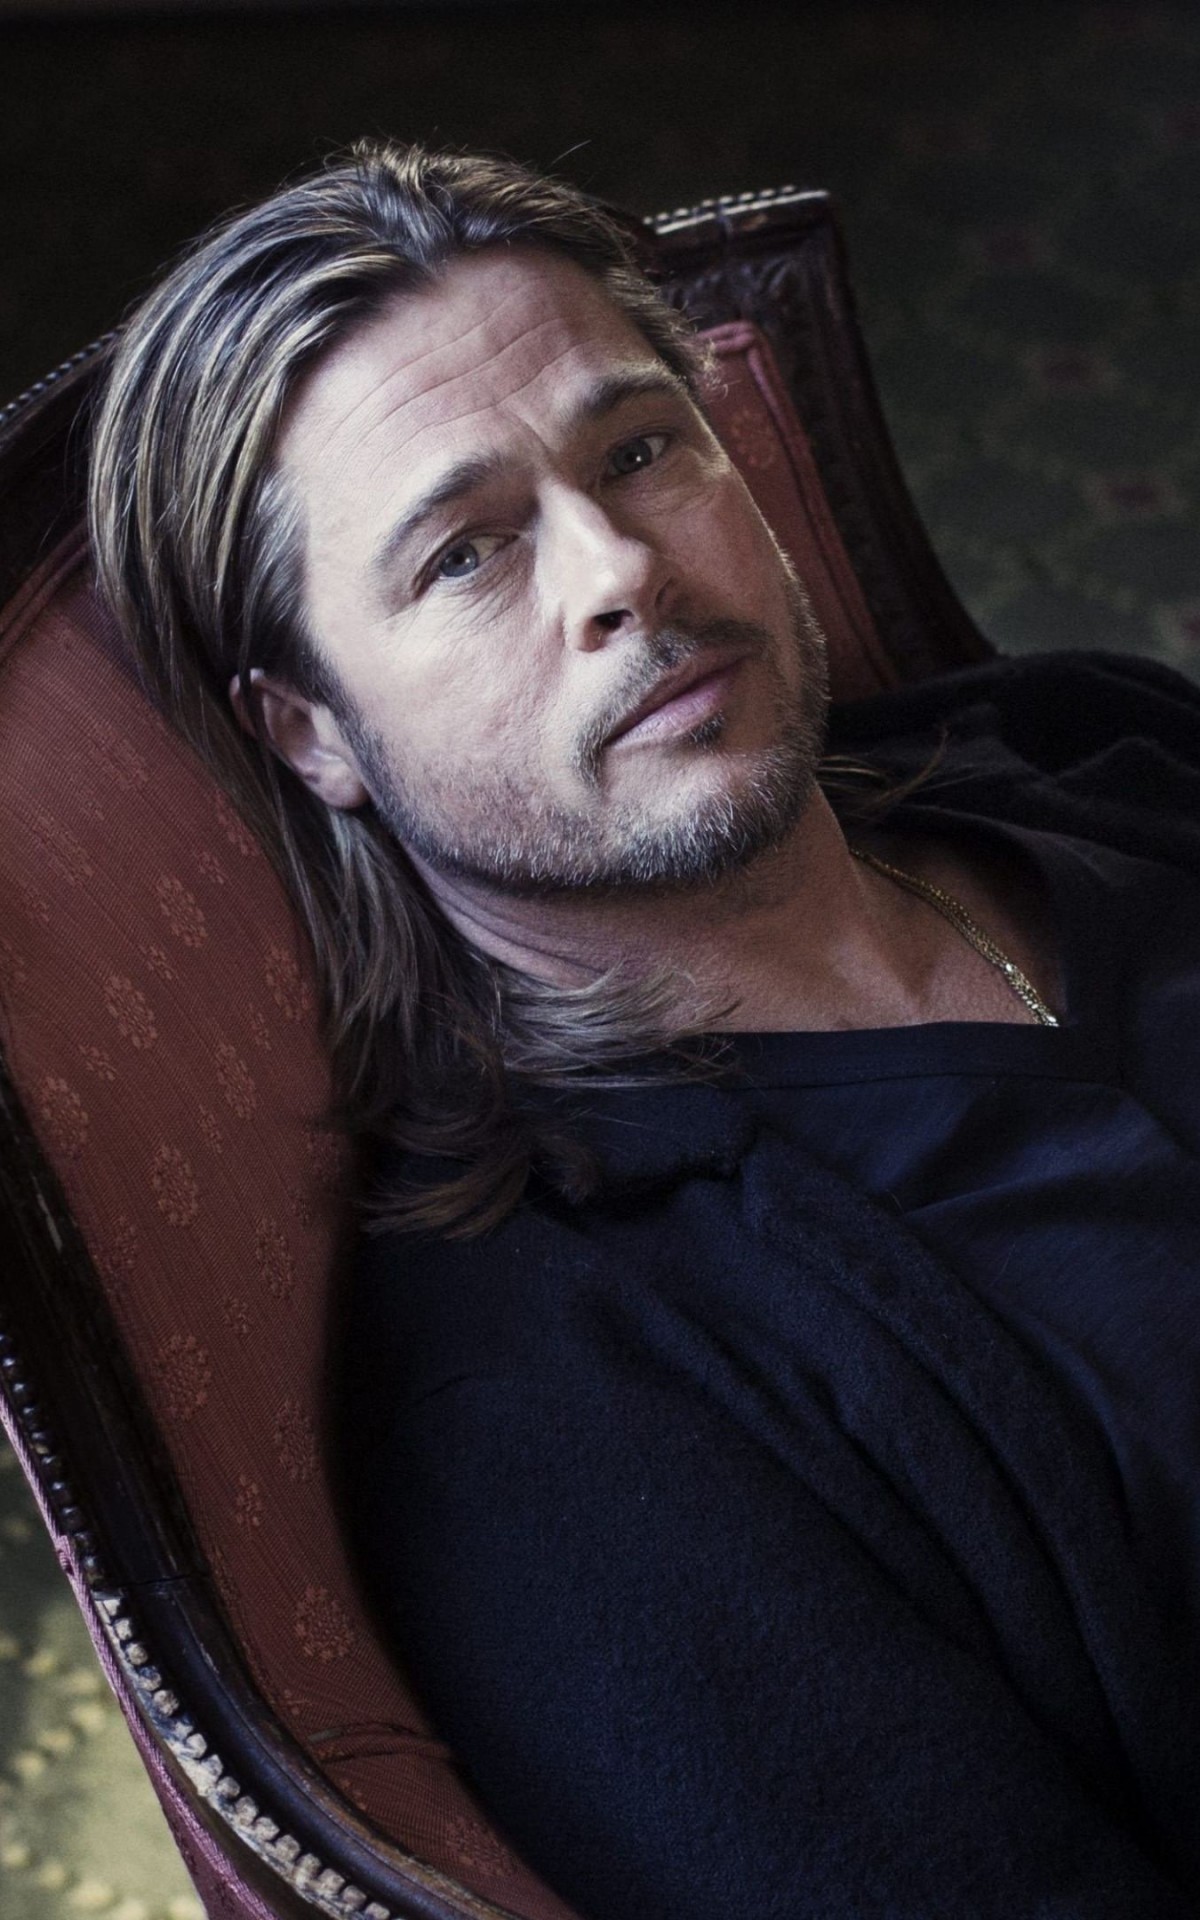 Brad Pitt Sitting On Chair Wallpaper for Amazon Kindle Fire HDX